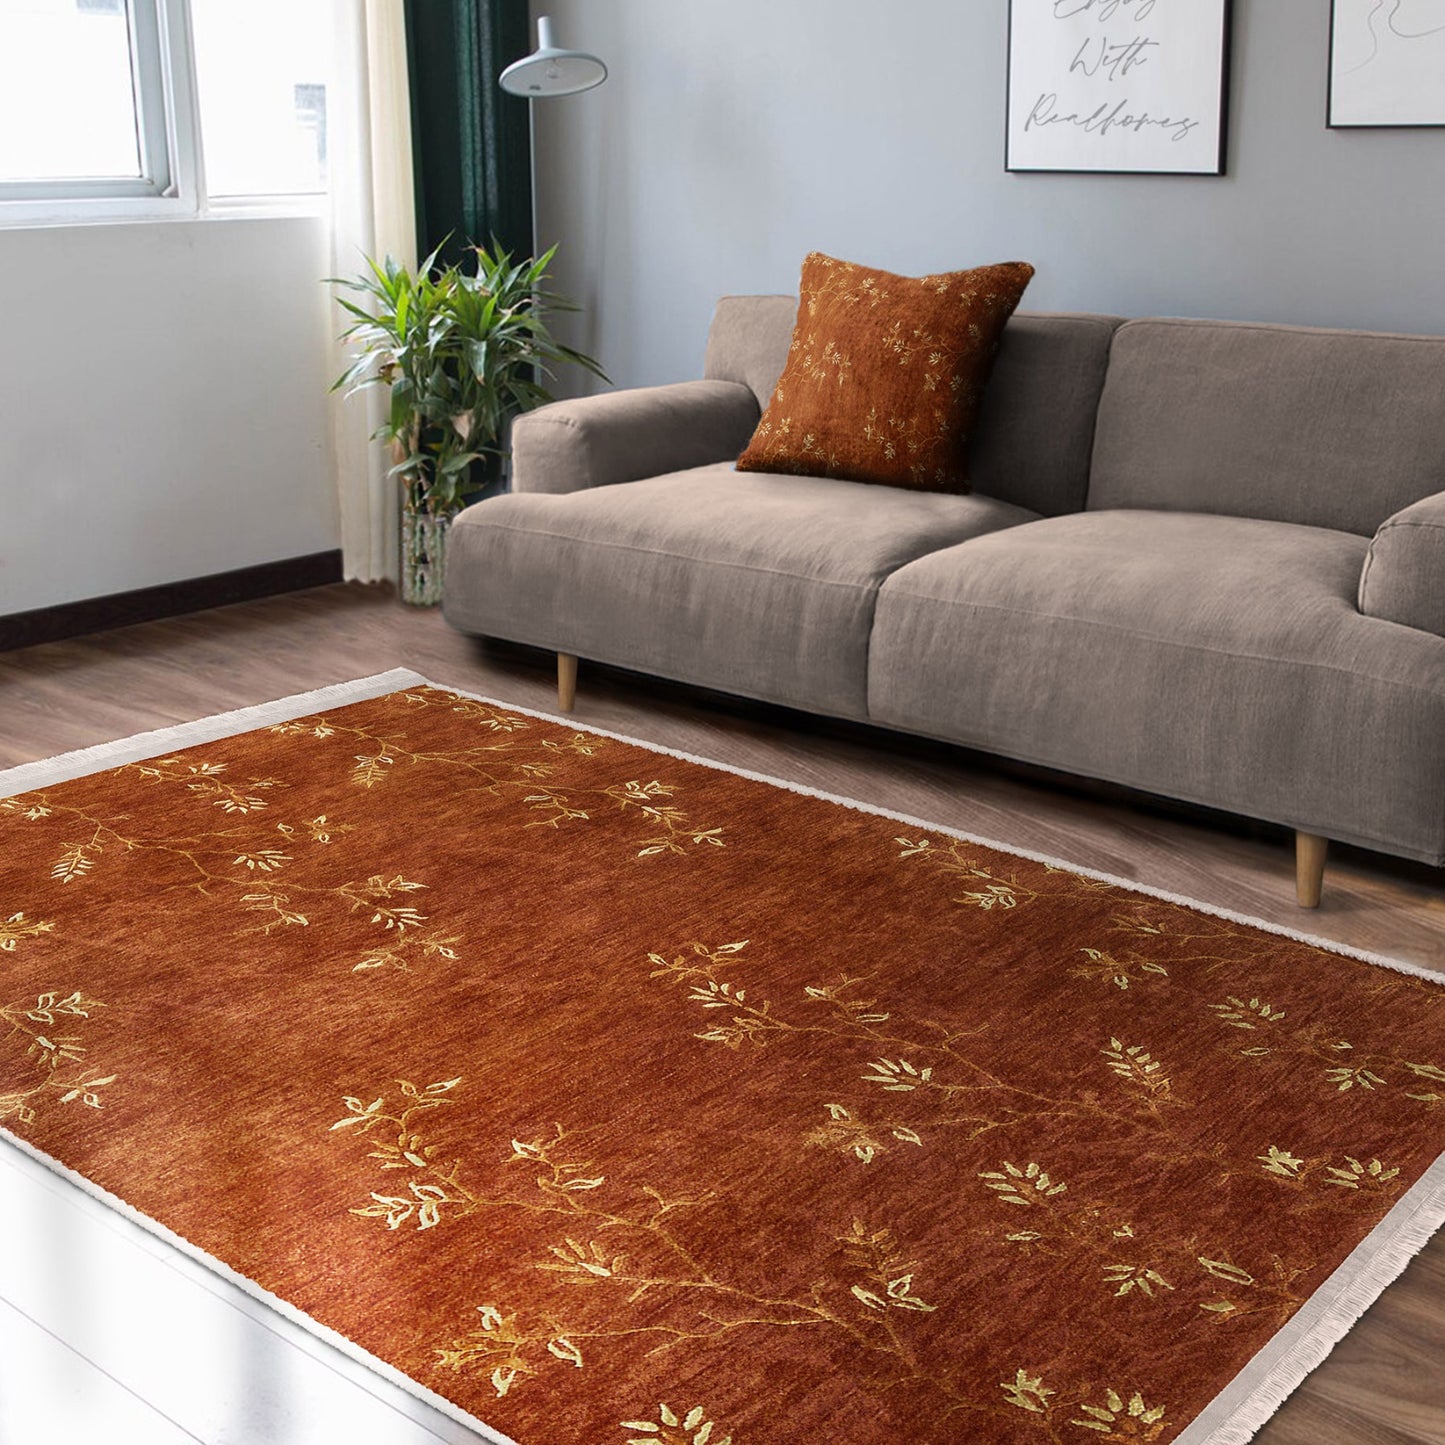 Elegant Rug with Dry Flower Pattern for Natural Home Decor